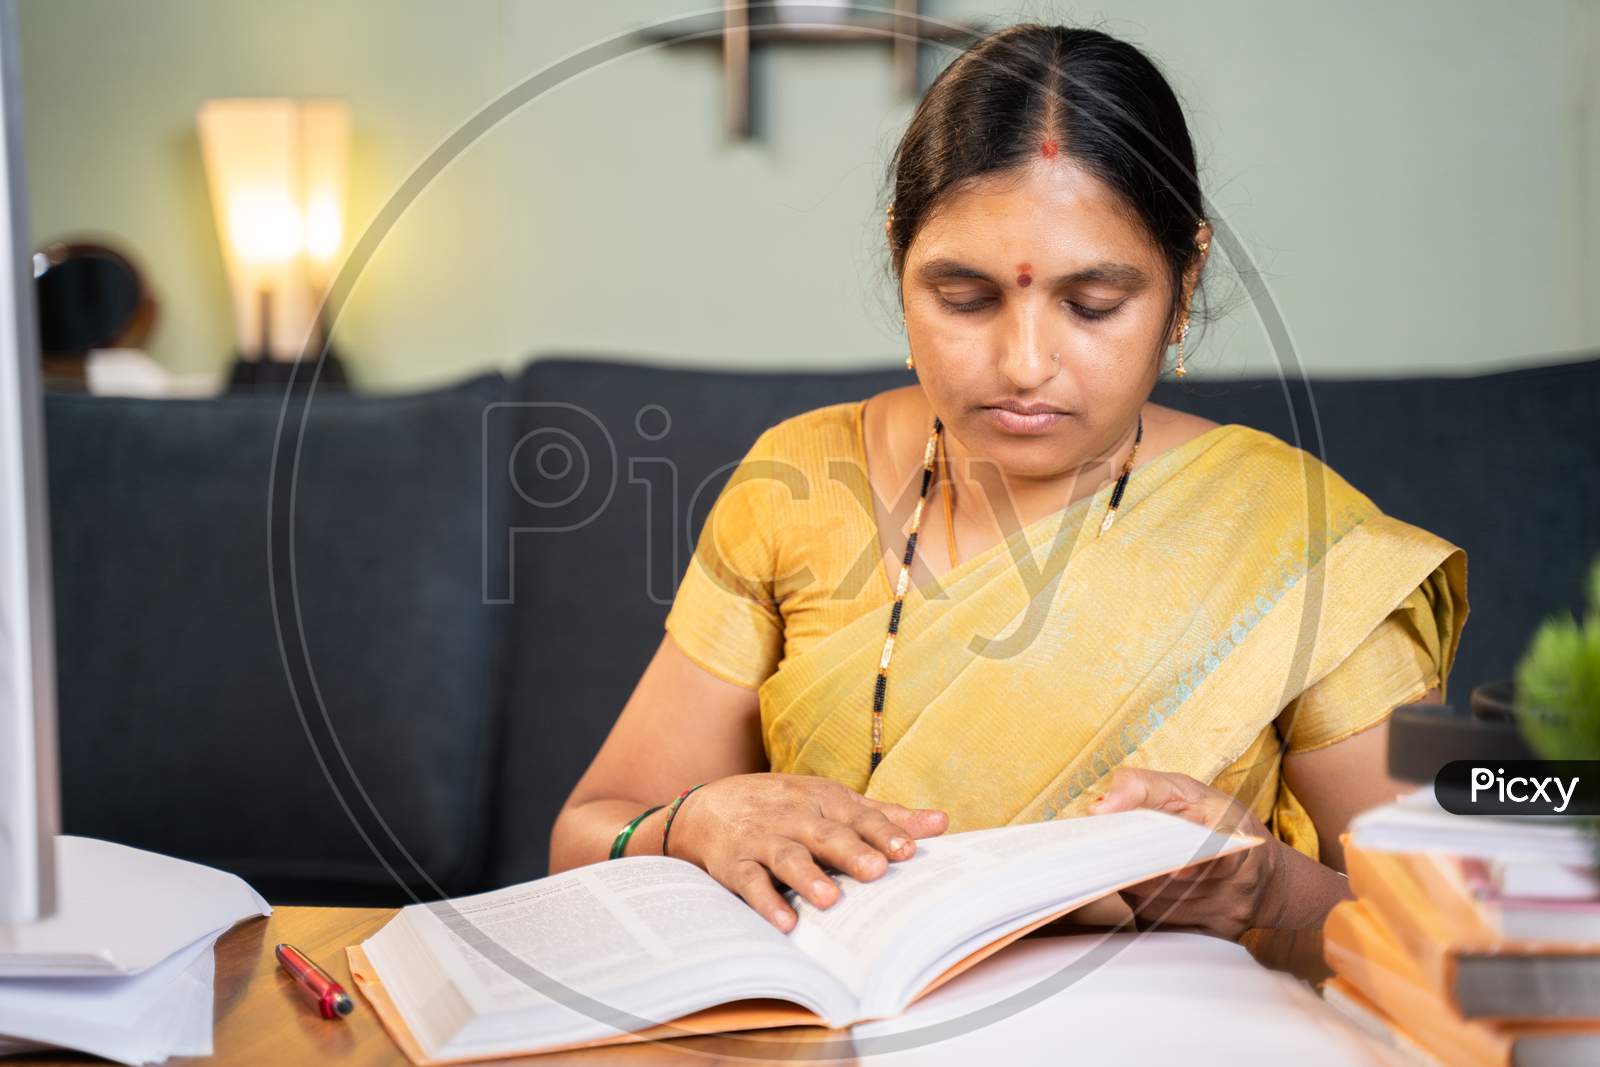 Indian Woman Busy Preparing Form Fom Seeing Books For Teaching Online Class - 40S Lady Studying By Referring Books For Examination At Home.